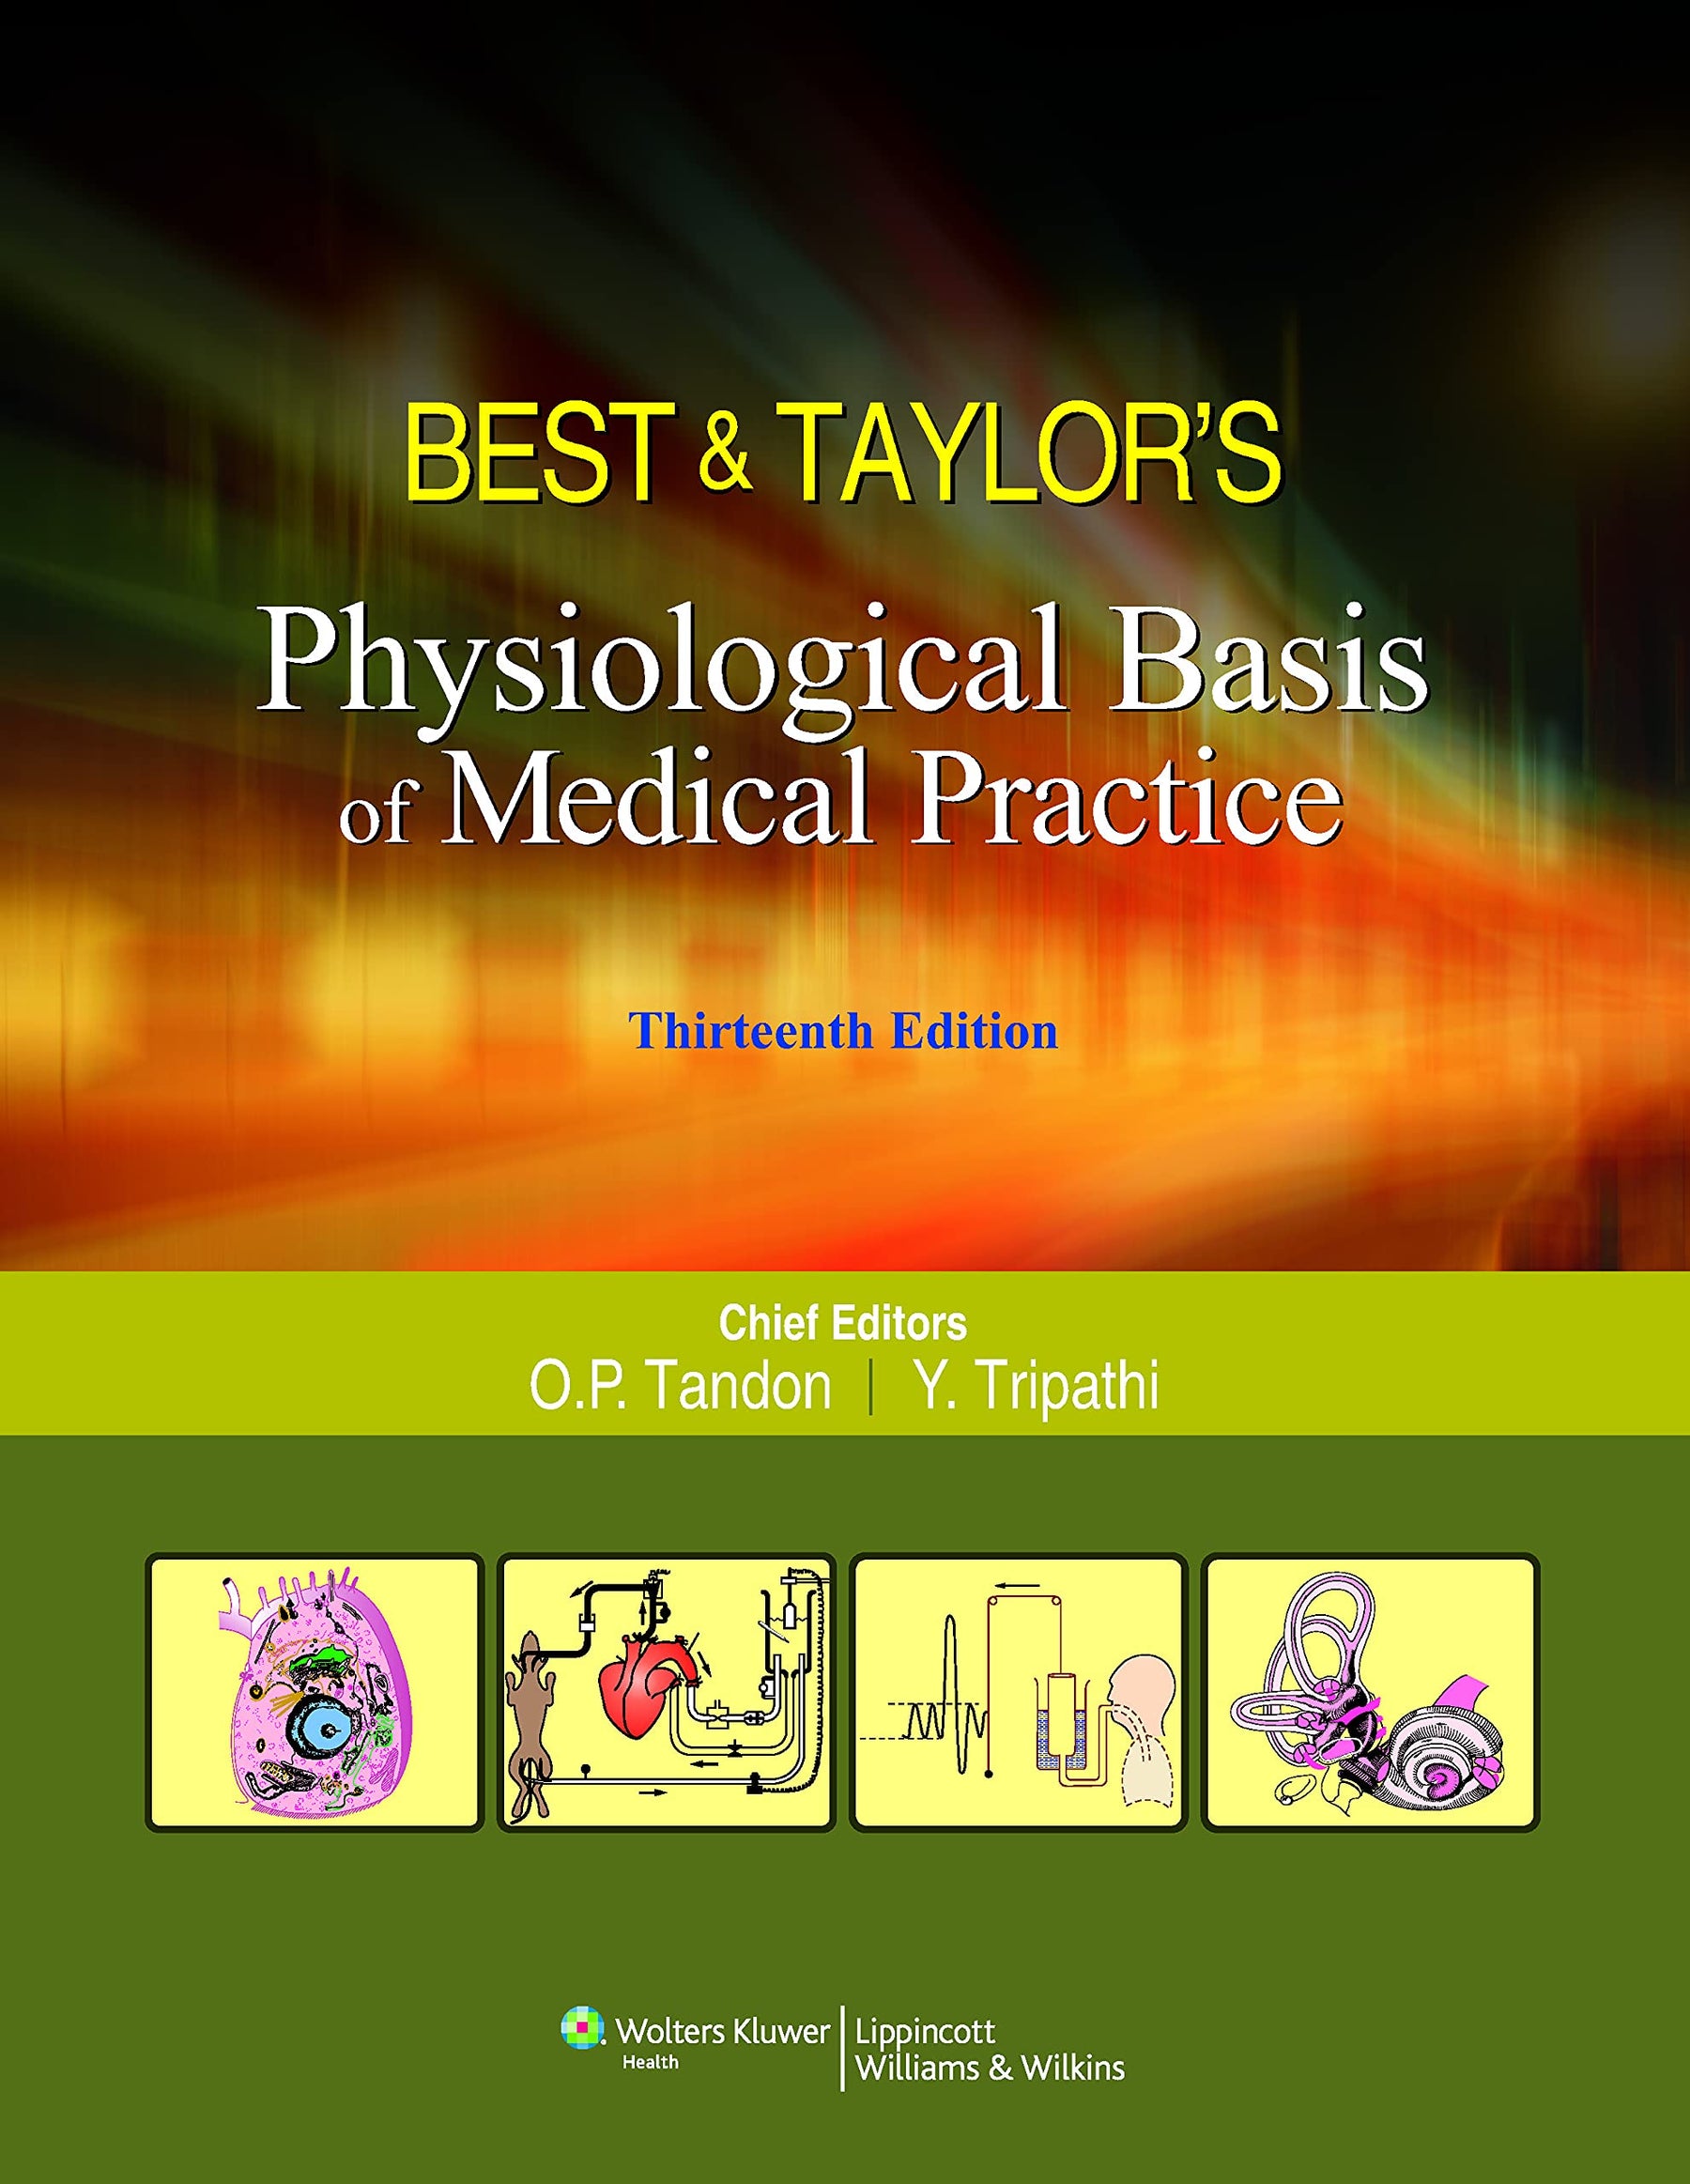 Best & Taylor’s Physiological Basis of Medical Practice, 13/e by Tandon